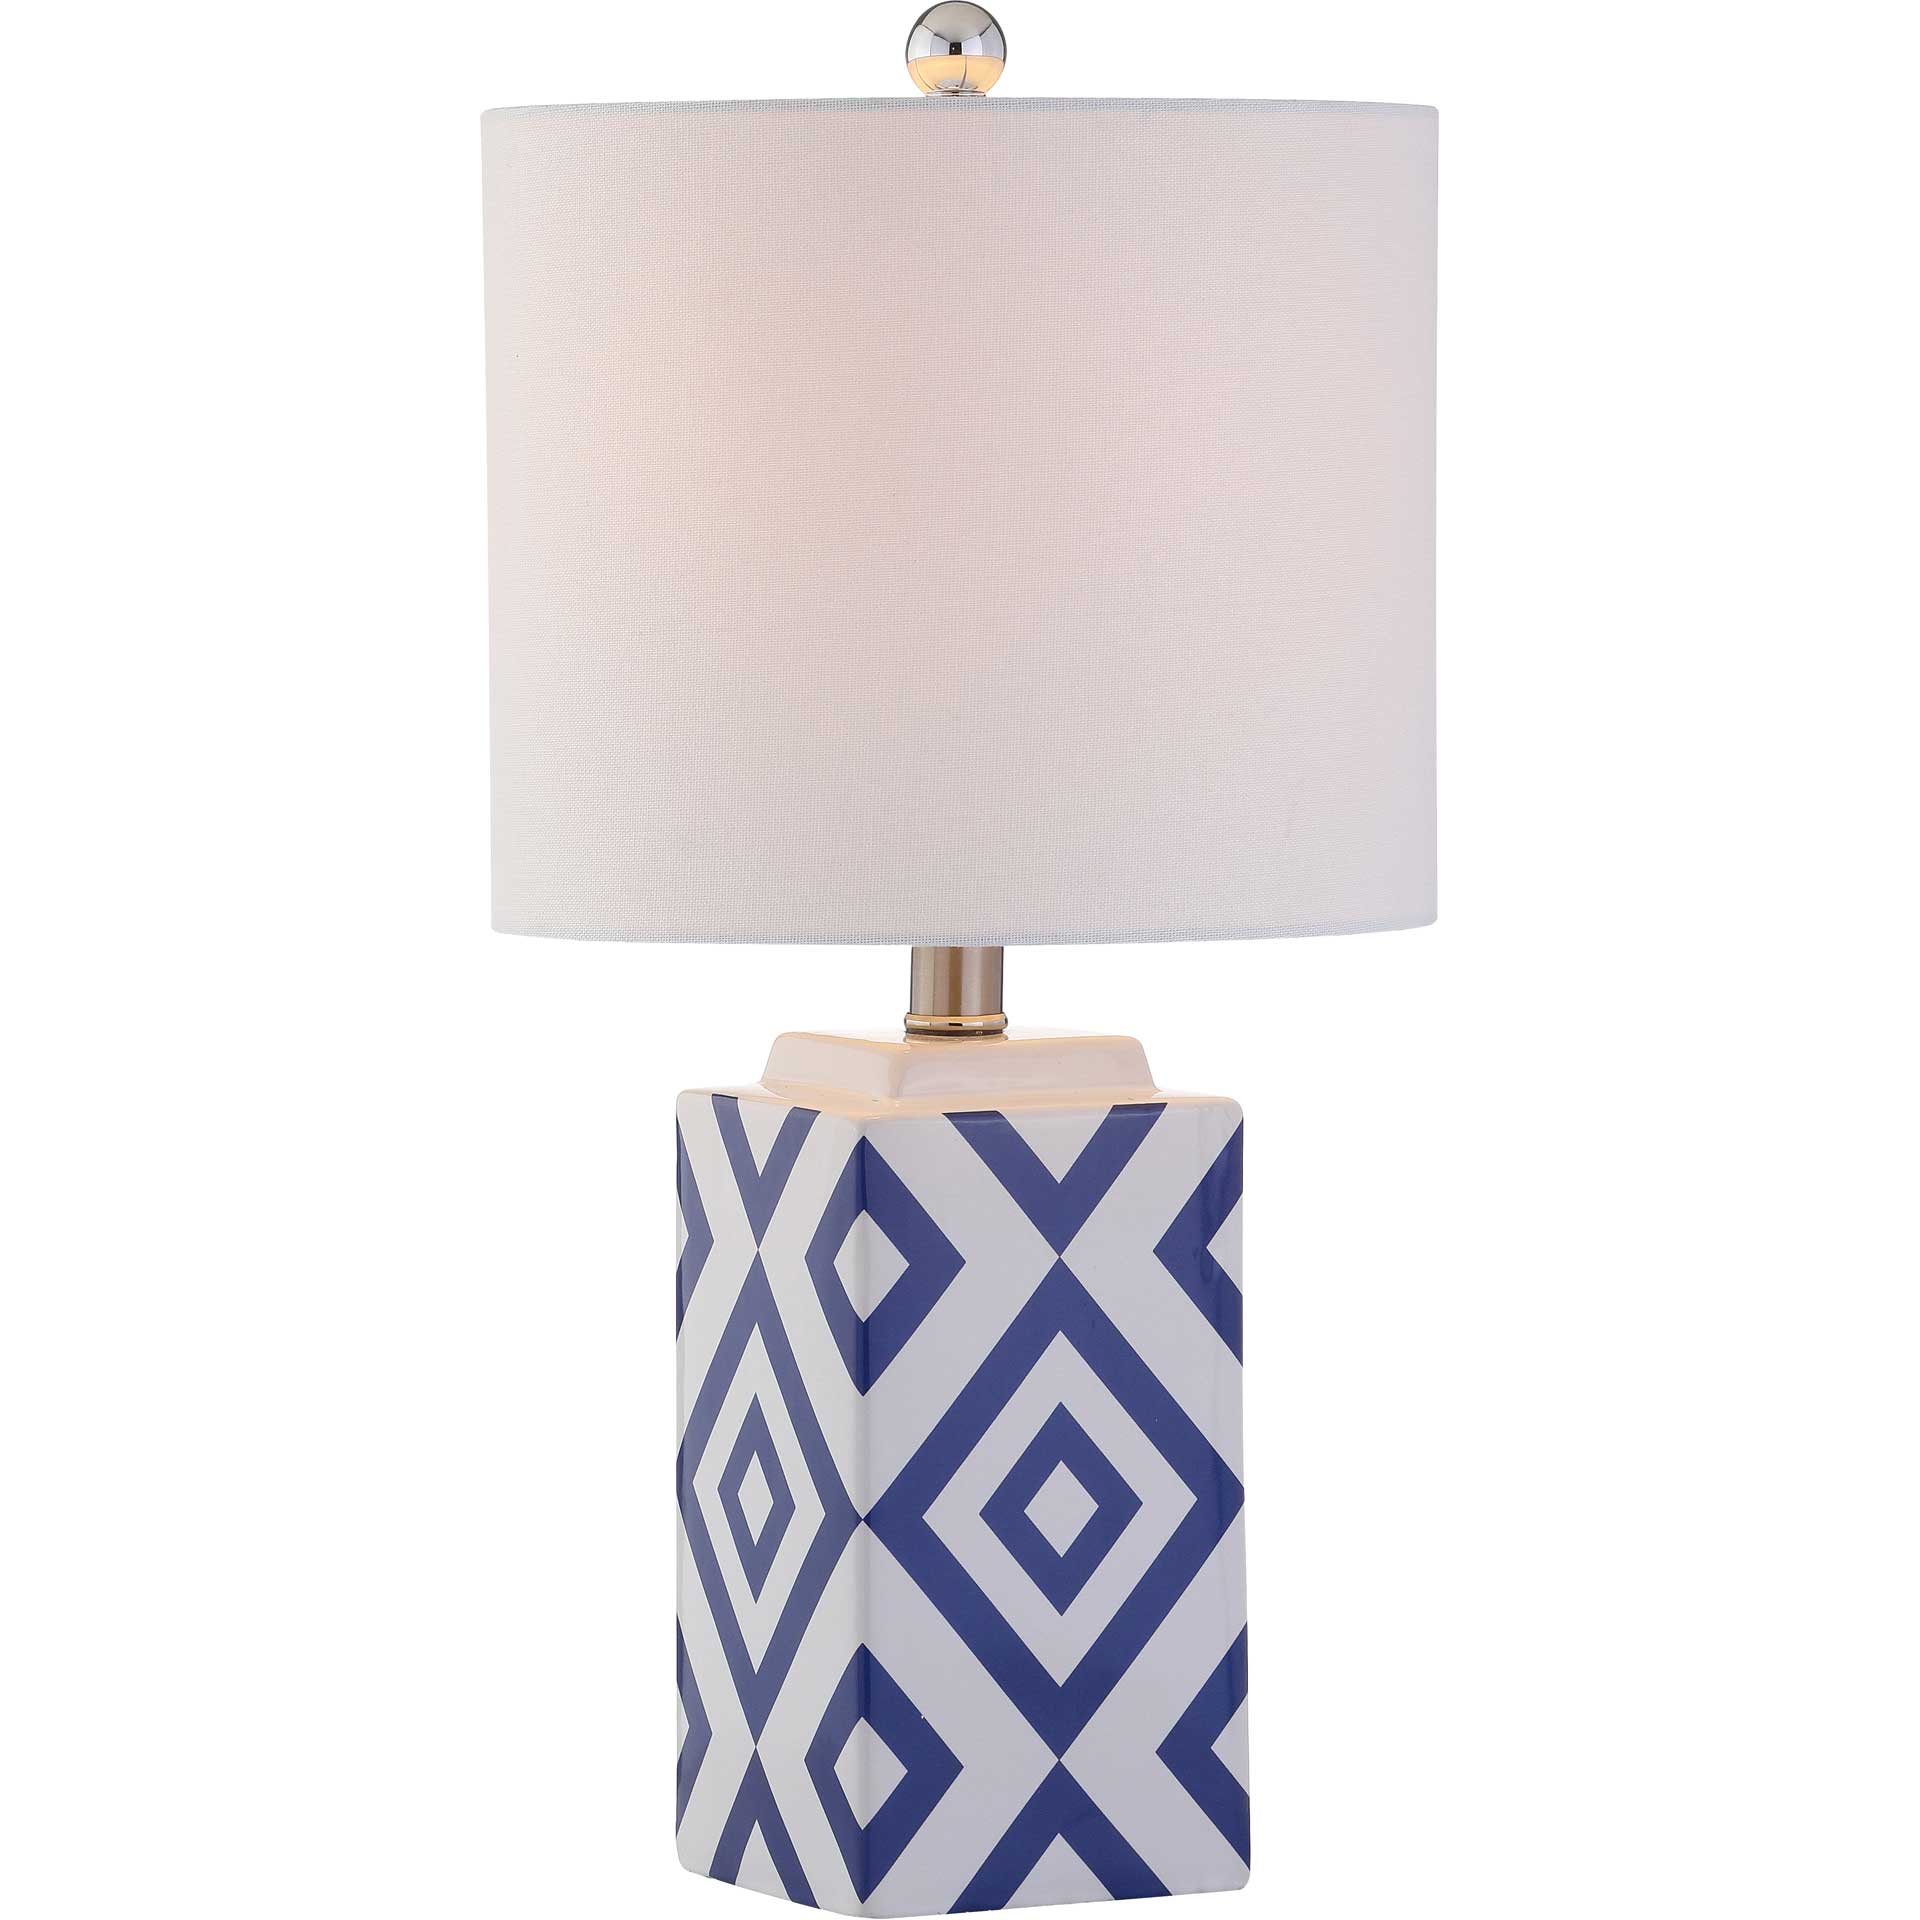 Lucian Table Lamp White/Blue